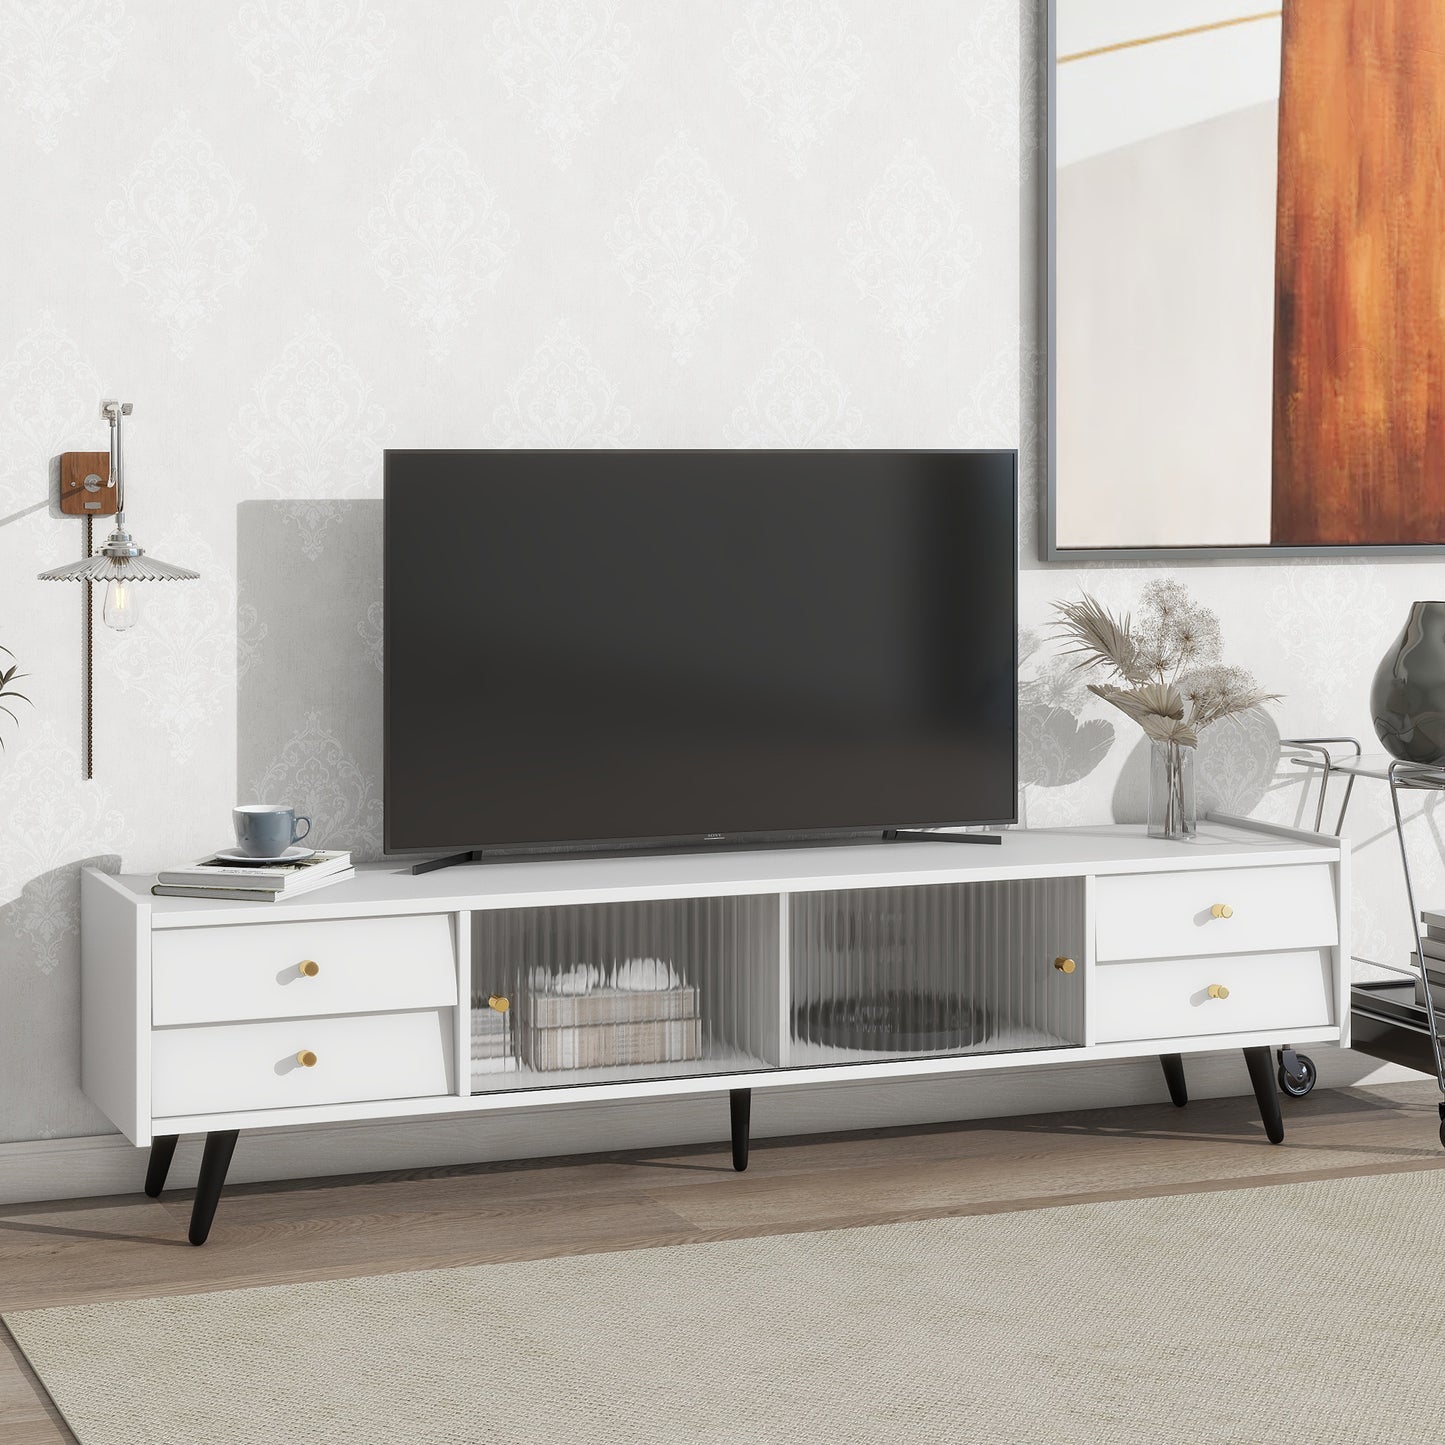 ON-TREND Contemporary TV Stand with Sliding Fluted Glass Doors, Slanted Drawers Media Console for TVs Up to 70", Chic Elegant TV Cabinet with Golden Metal Handles , White - Enova Luxe Home Store